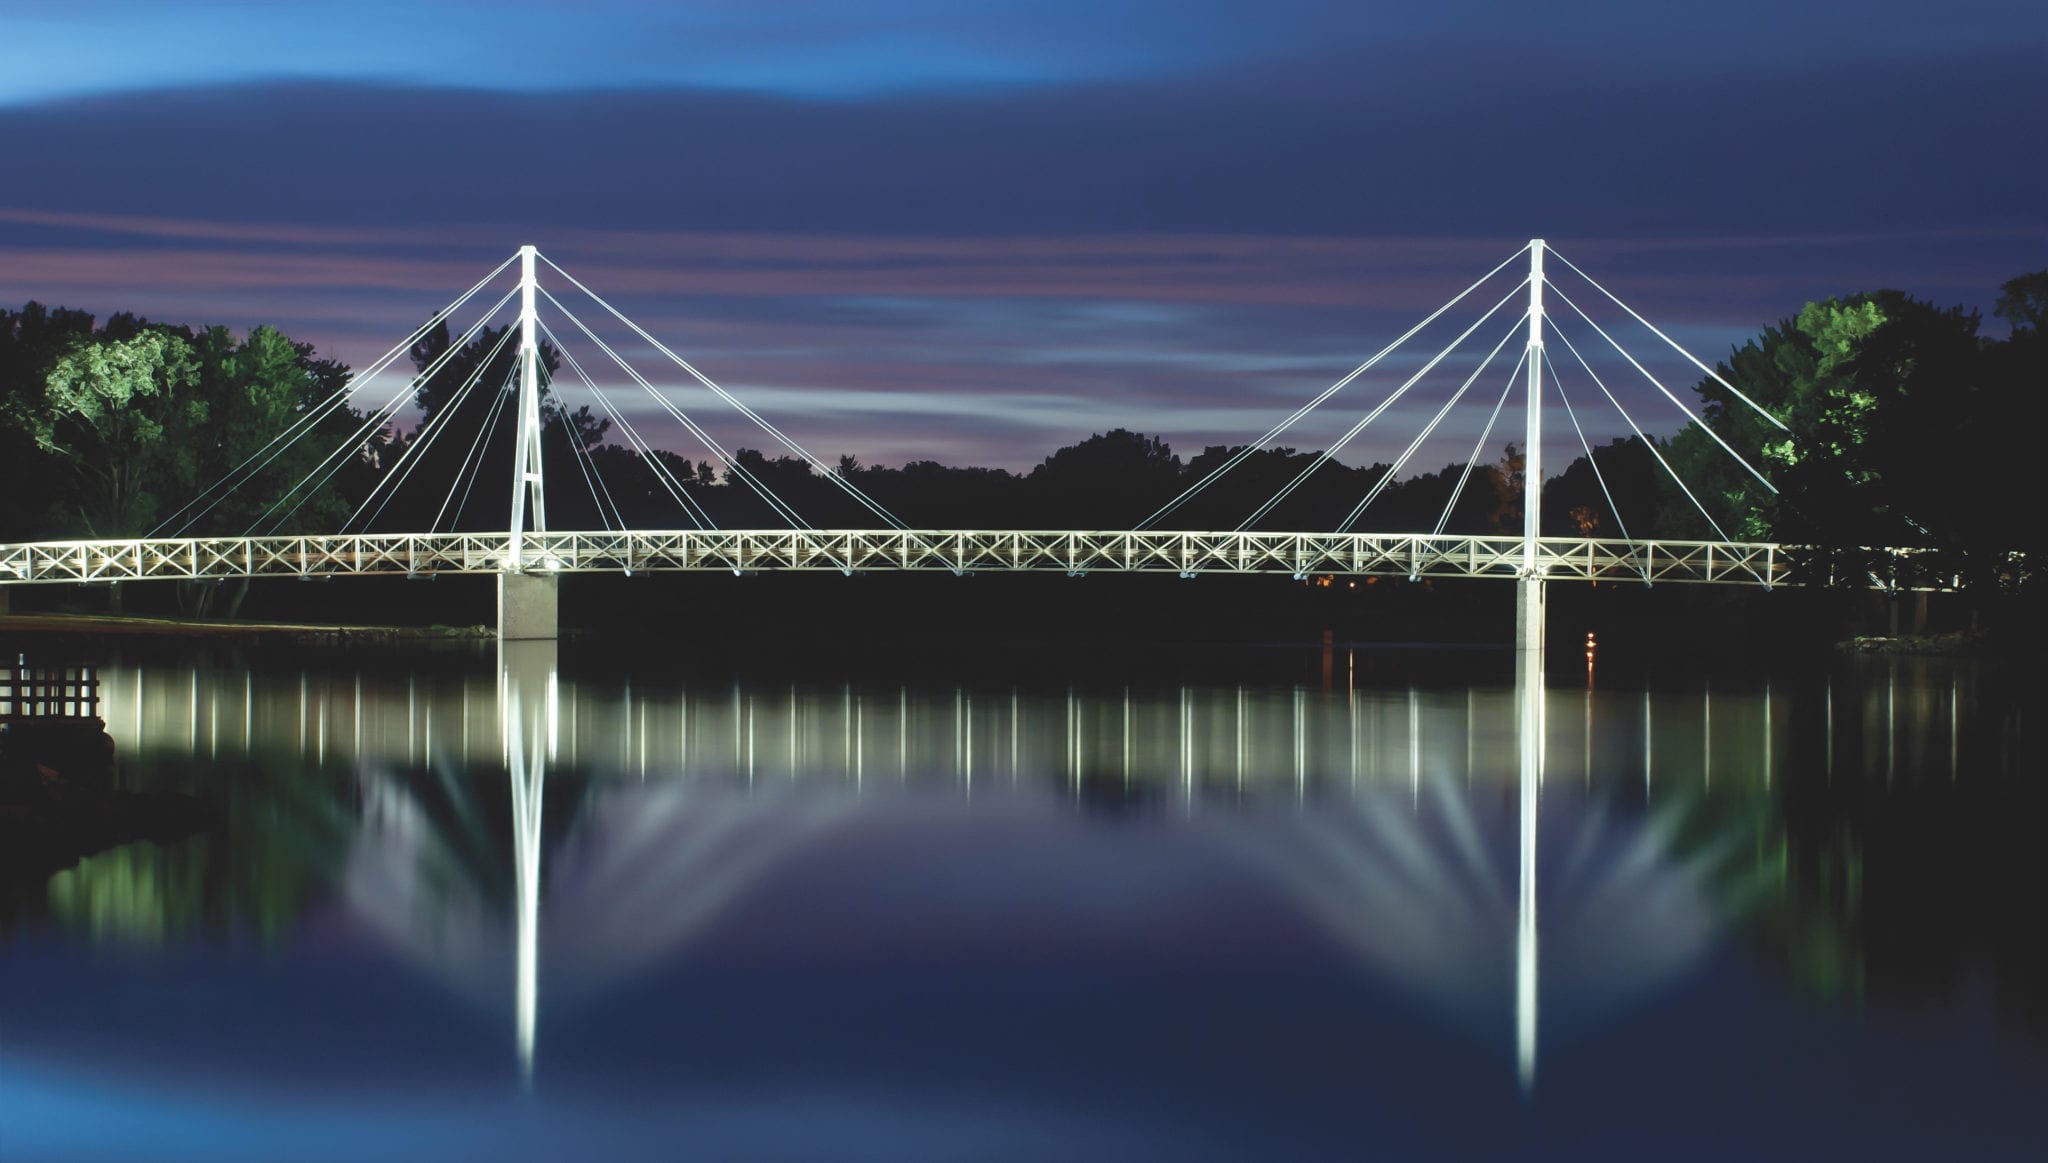 Wide view of cable-stayed pedestrian bridge design with lighting